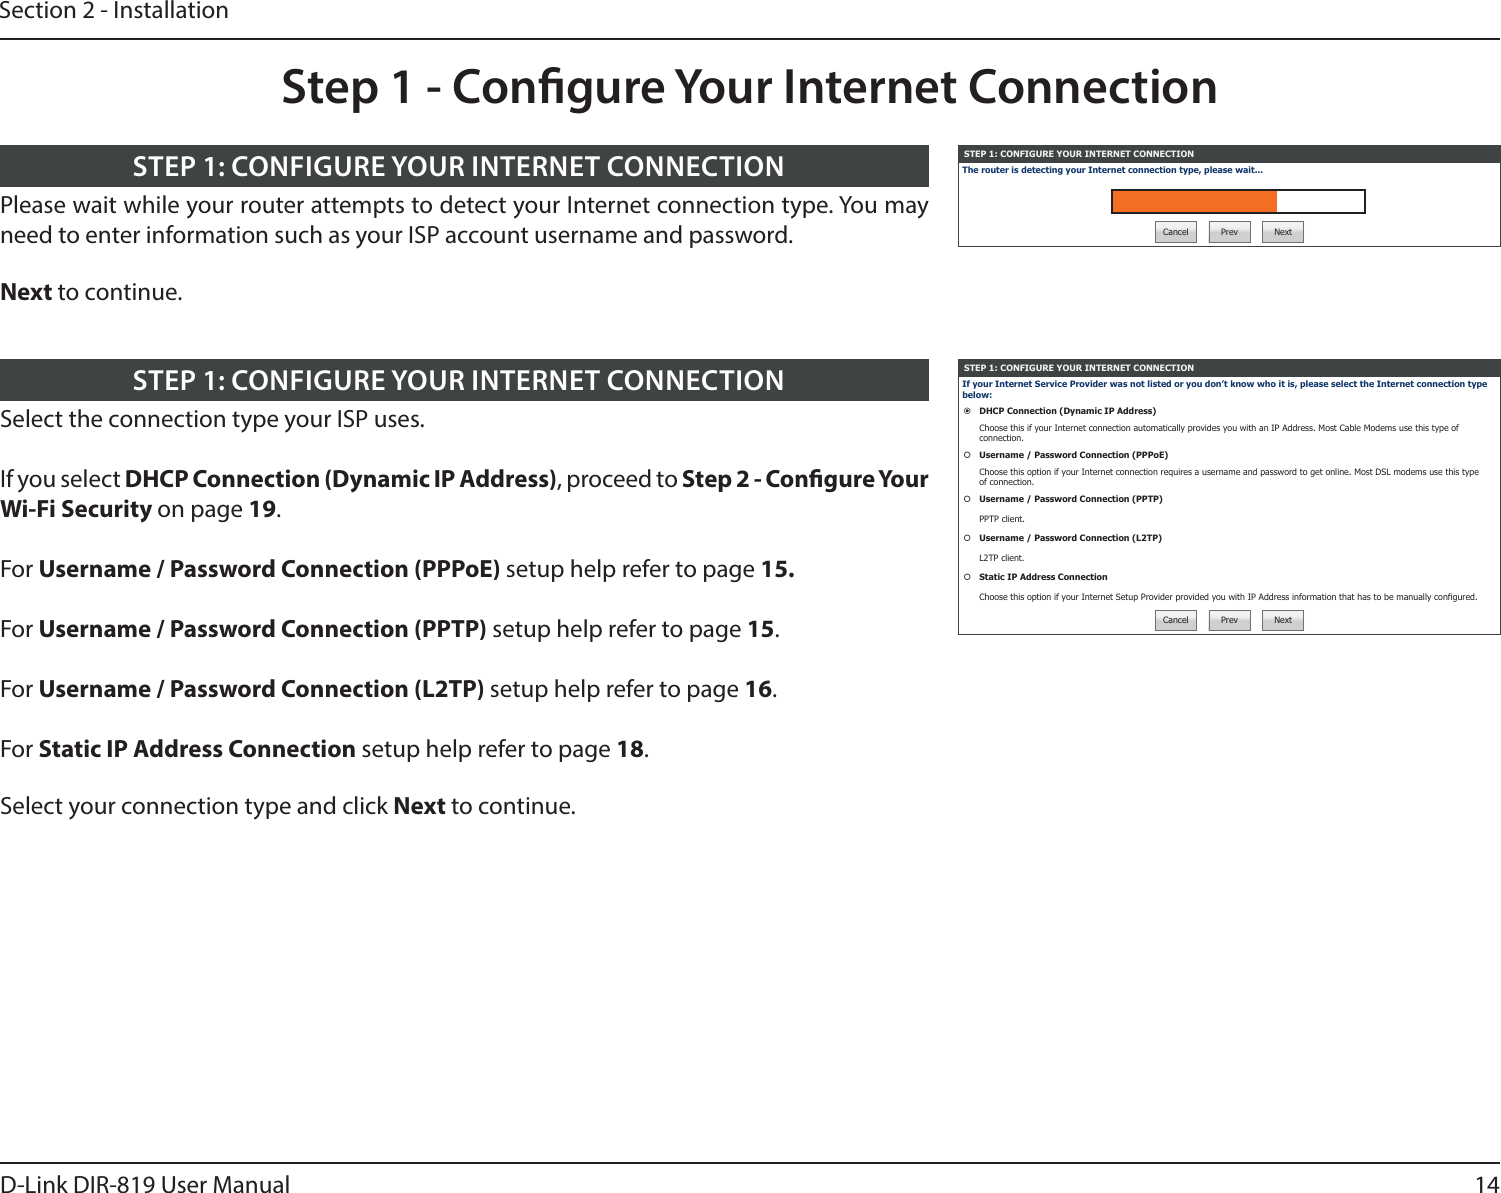 14D-Link DIR-819 User ManualSection 2 - InstallationSTEP 1: CONFIGURE YOUR INTERNET CONNECTIONThe router is detecting your Internet connection type, please wait...Cancel Prev NextPlease wait while your router attempts to detect your Internet connection type. You may need to enter information such as your ISP account username and password.Next to continue.STEP 1: CONFIGURE YOUR INTERNET CONNECTIONStep 1 - Congure Your Internet ConnectionSTEP 1: CONFIGURE YOUR INTERNET CONNECTIONIf your Internet Service Provider was not listed or you don’t know who it is, please select the Internet connection type below:DHCP Connection (Dynamic IP Address)Choose this if your Internet connection automatically provides you with an IP Address. Most Cable Modems use this type of connection.Username / Password Connection (PPPoE)Choose this option if your Internet connection requires a username and password to get online. Most DSL modems use this type of connection.Username / Password Connection (PPTP)PPTP client.Username / Password Connection (L2TP)L2TP client.Static IP Address ConnectionChoose this option if your Internet Setup Provider provided you with IP Address information that has to be manually congured.Cancel Prev NextSelect the connection type your ISP uses.If you select DHCP Connection (Dynamic IP Address), proceed to Step 2 - Congure Your Wi-Fi Security on page 19.For Username / Password Connection (PPPoE) setup help refer to page 15.For Username / Password Connection (PPTP) setup help refer to page 15.For Username / Password Connection (L2TP) setup help refer to page 16.For Static IP Address Connection setup help refer to page 18.Select your connection type and click Next to continue.STEP 1: CONFIGURE YOUR INTERNET CONNECTION